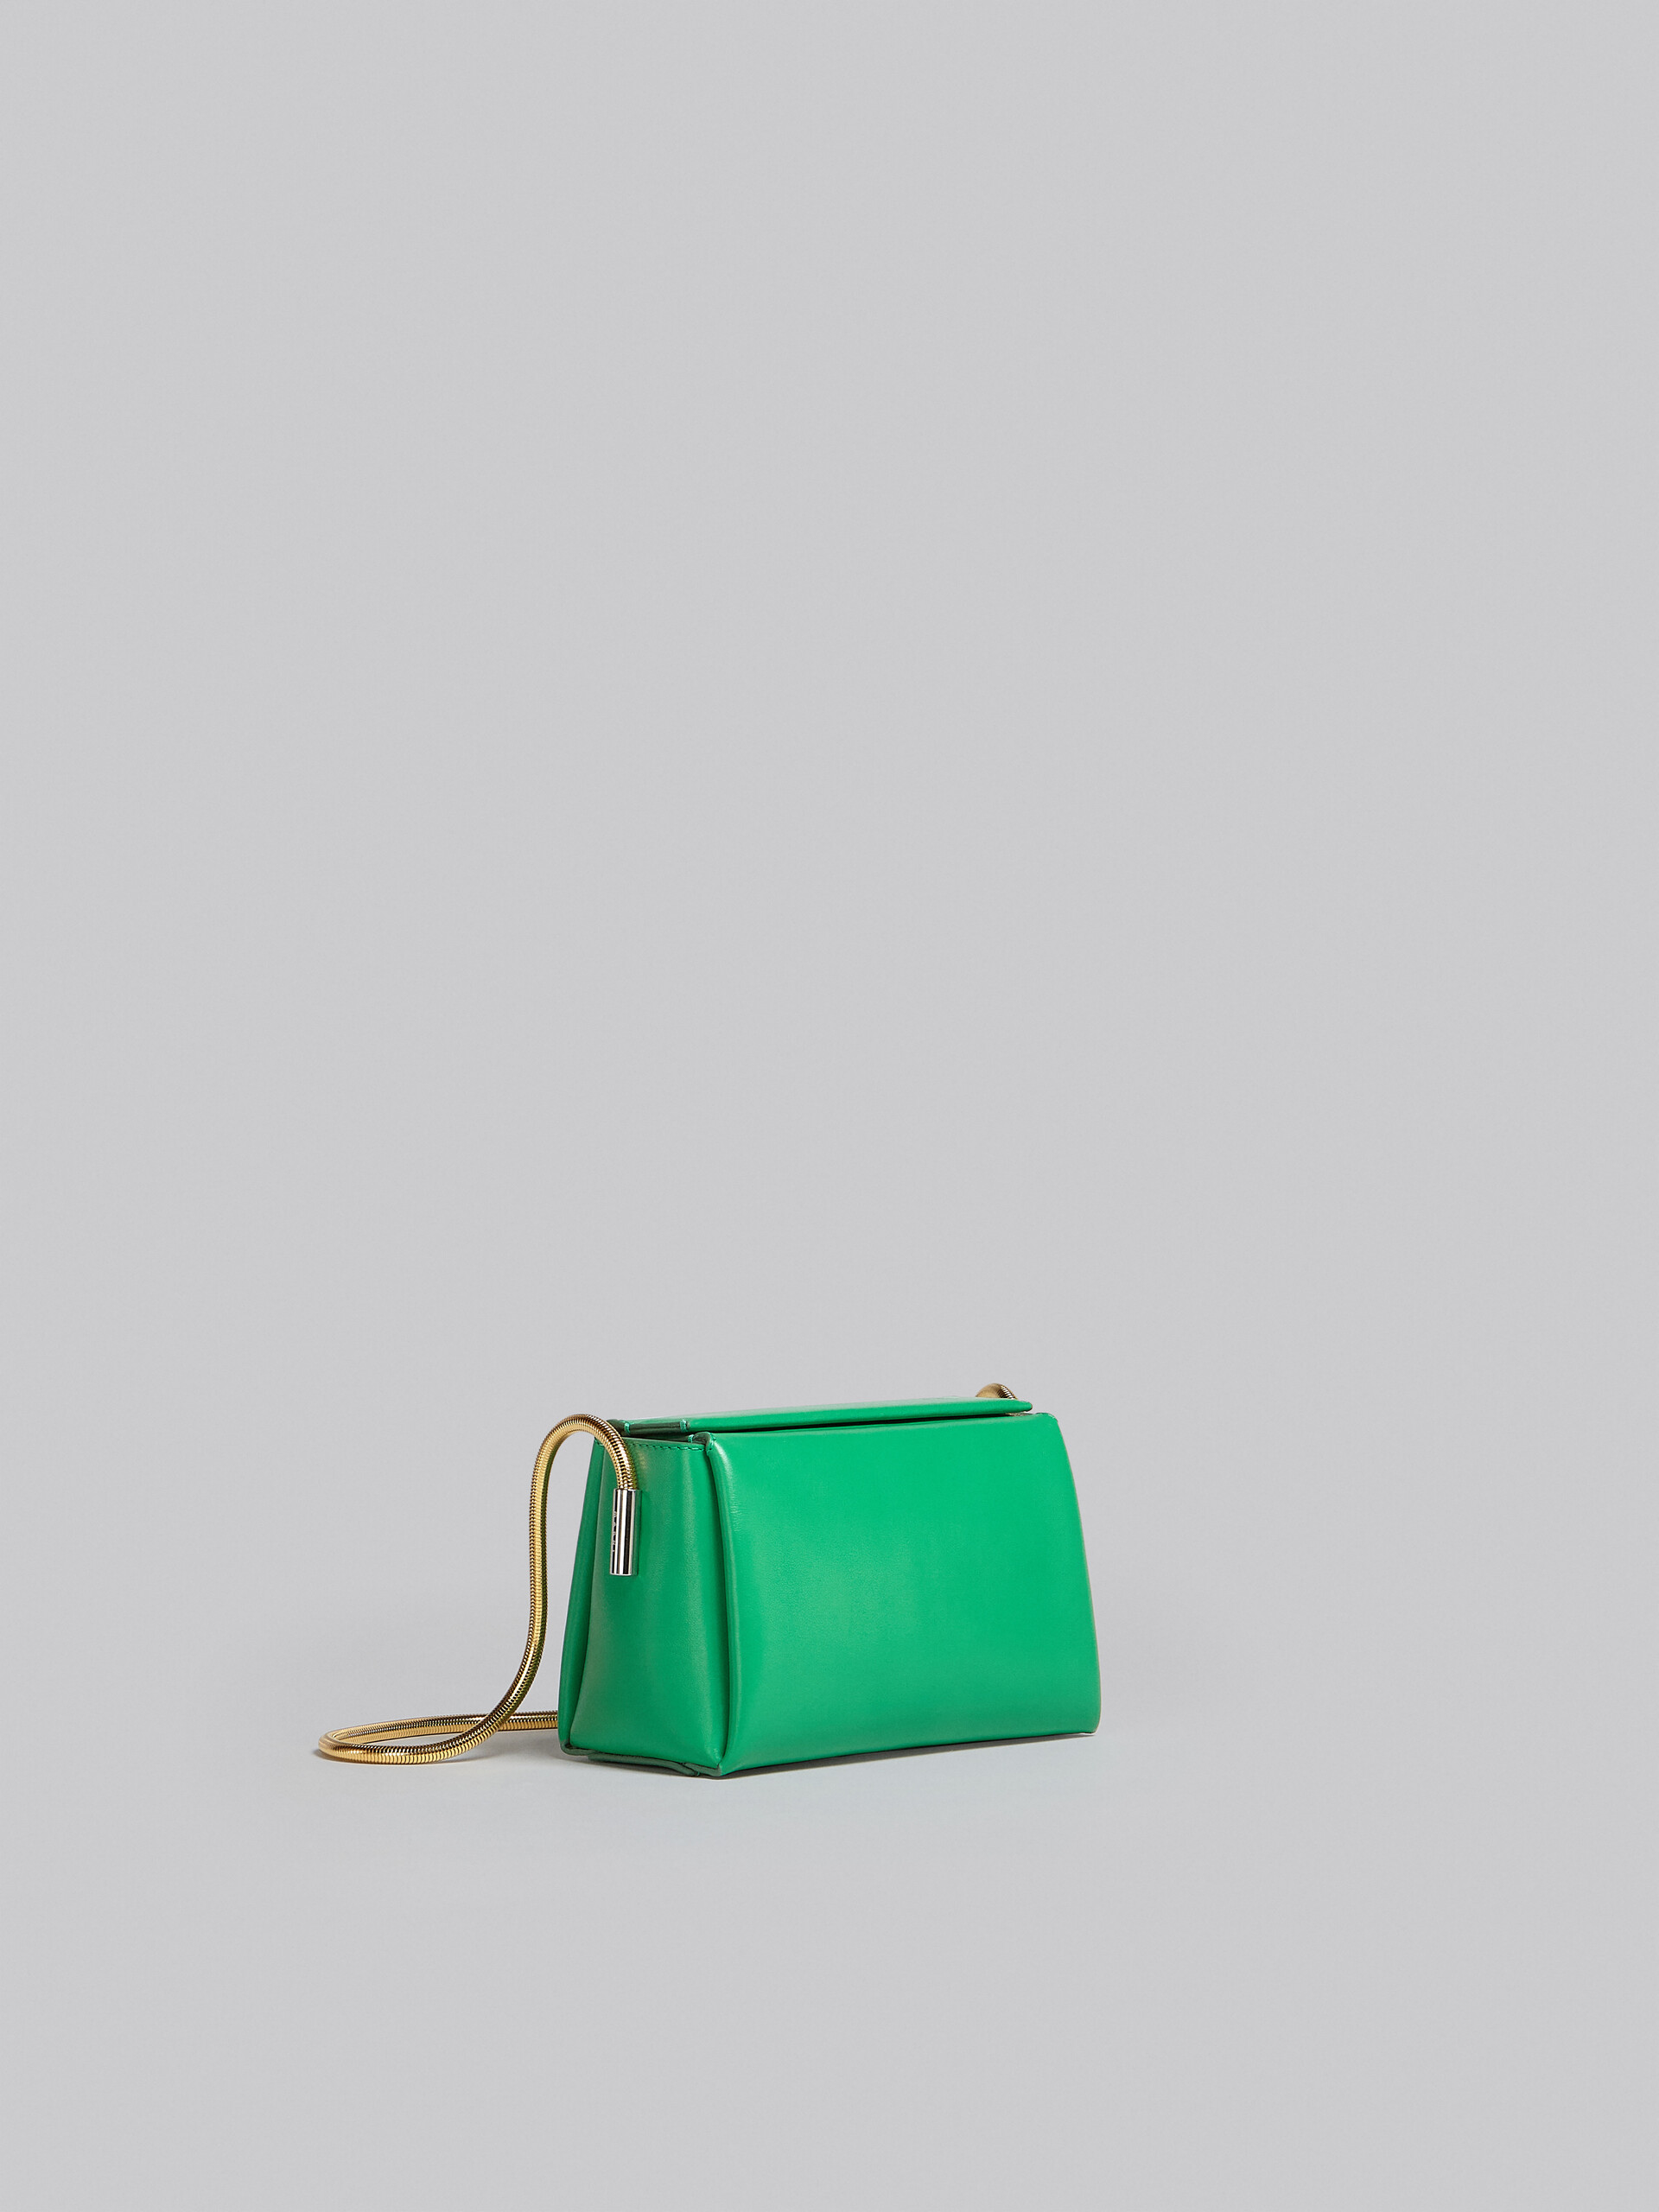 Toggle Small Bag in green leather - Shoulder Bag - Image 5